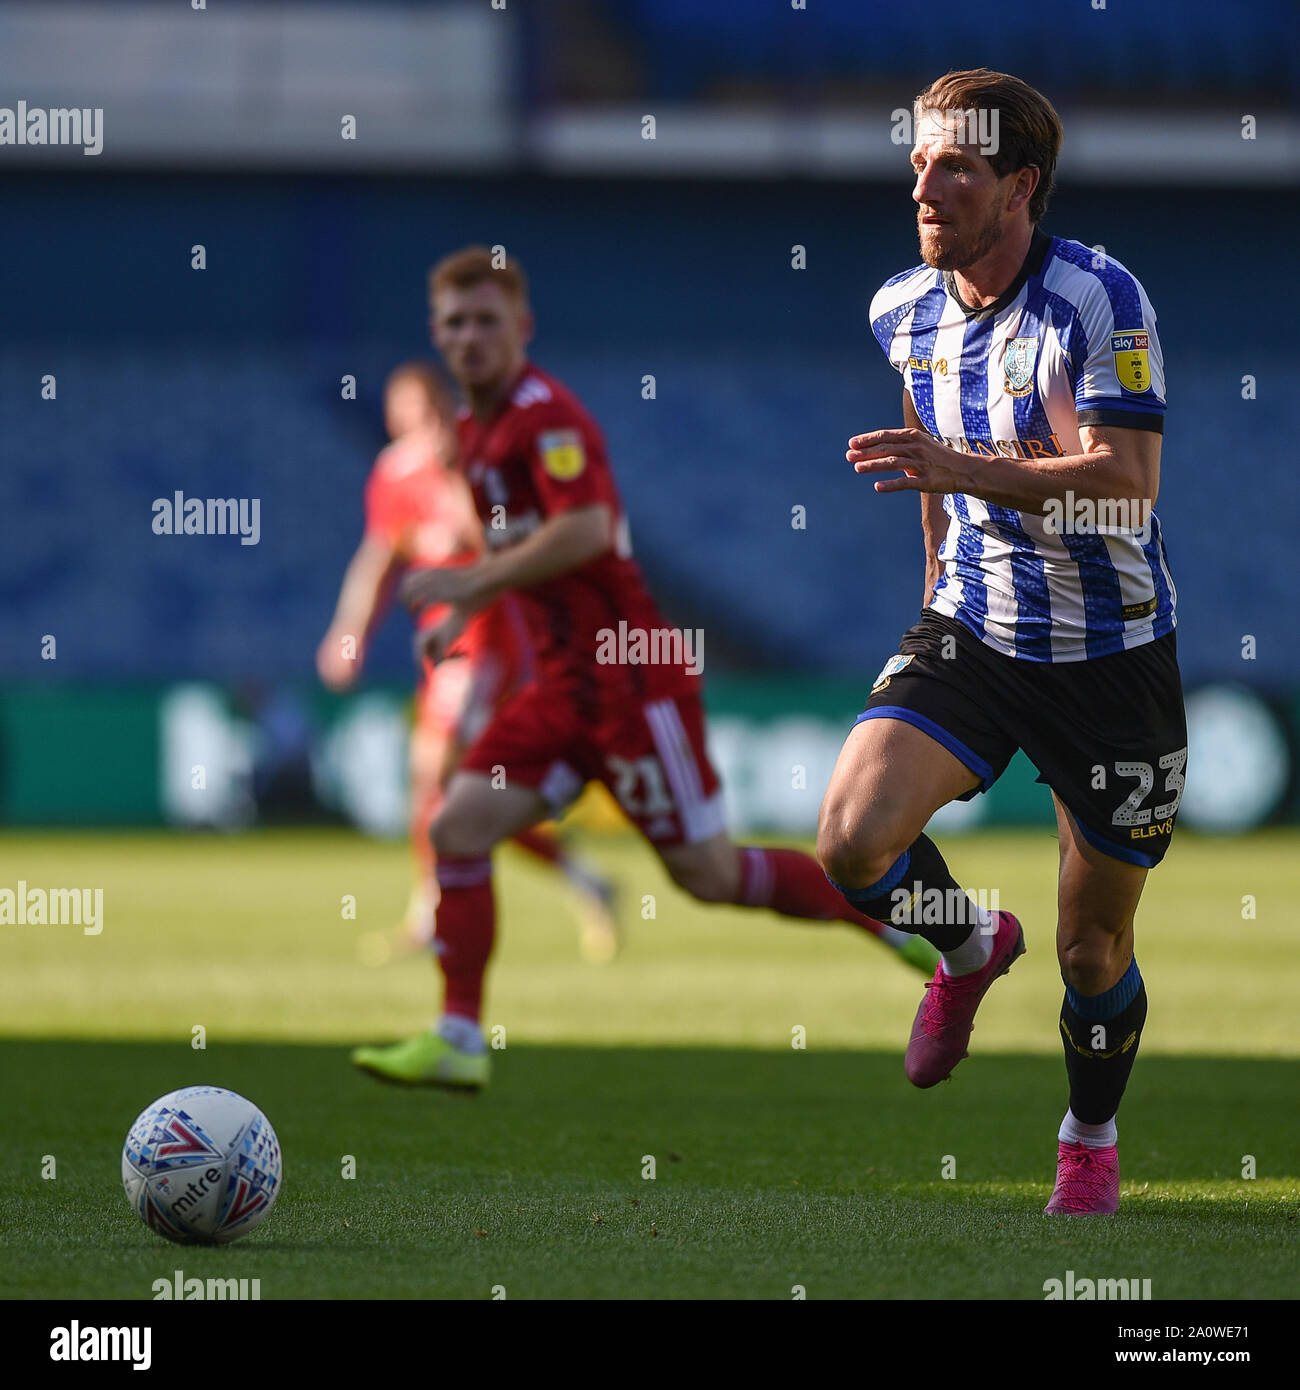 21st September 2019 , Hillsborough, Sheffield, England; Sky Bet Championship, Sheffield Wednesday vs Fulham : Credit: Dean Williams/News Images, Sam Hutchinson (23) of Sheffield Wednesday in action.  English Football League images are subject to DataCo Licence Stock Photo